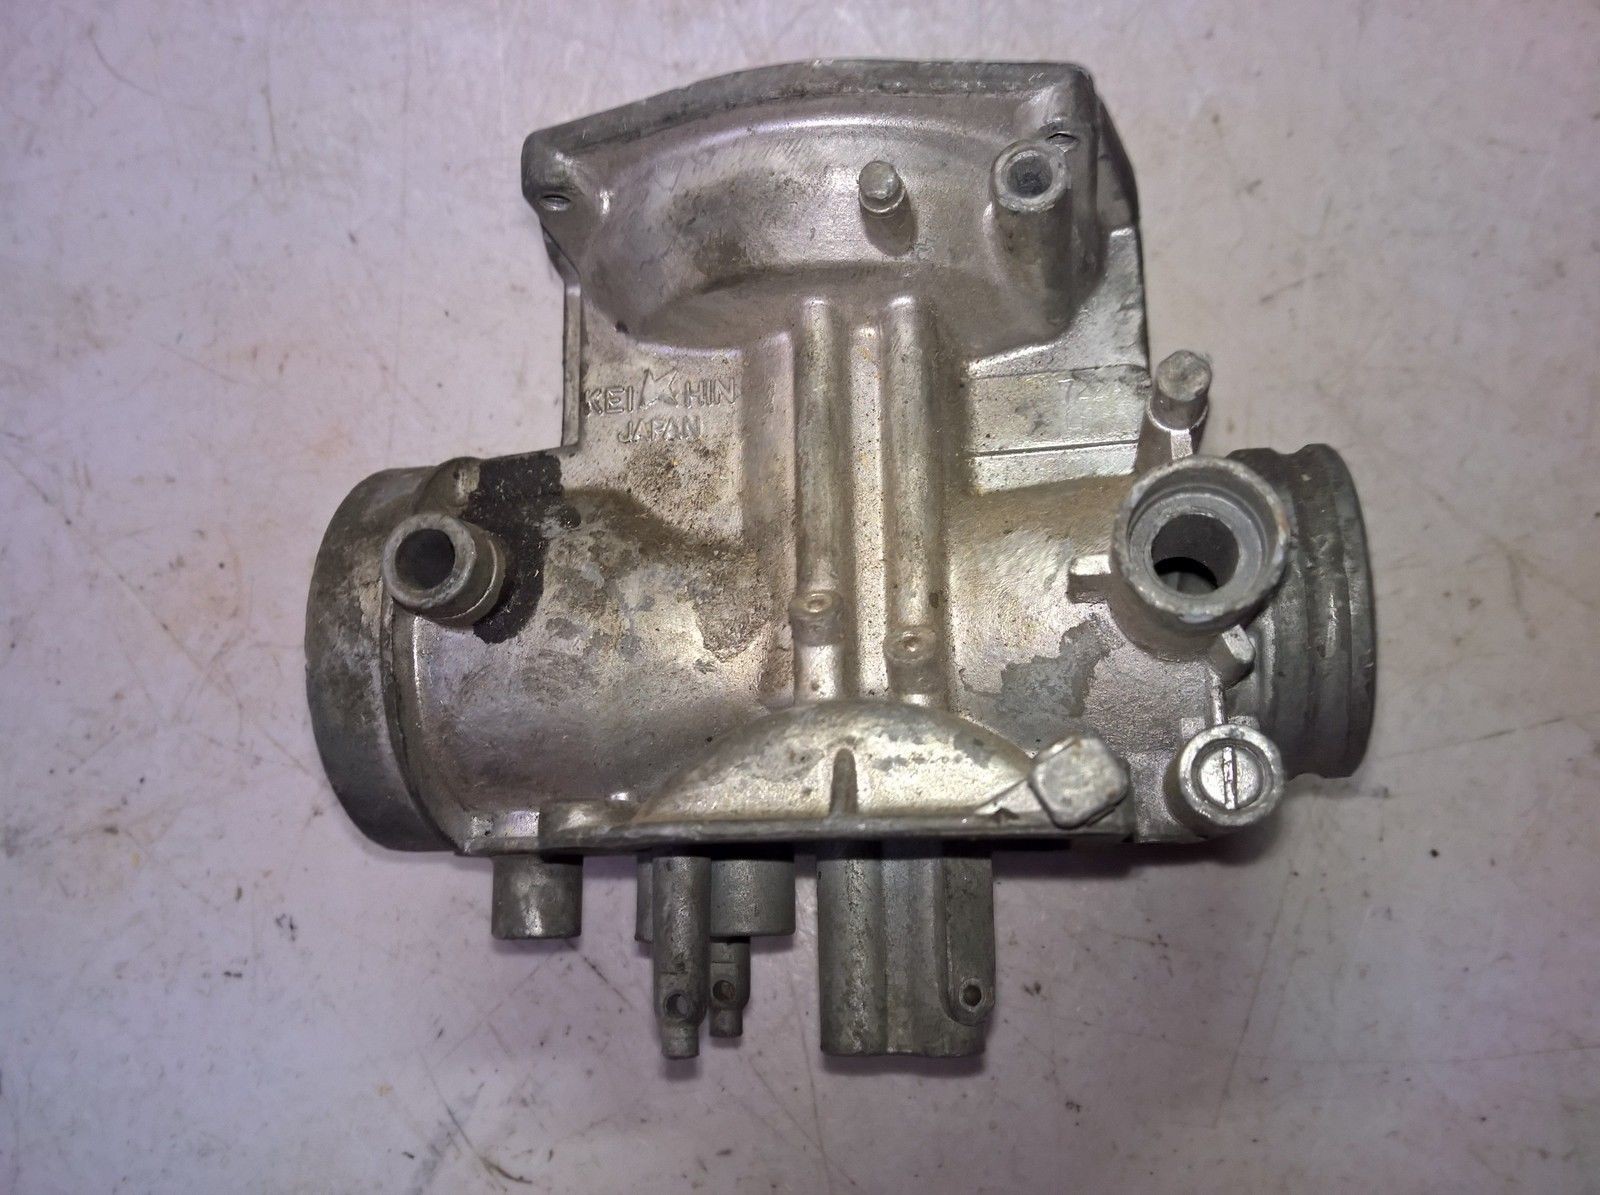 Keihin Early CV Style Carburettor Carby Carb Body 722A Casting